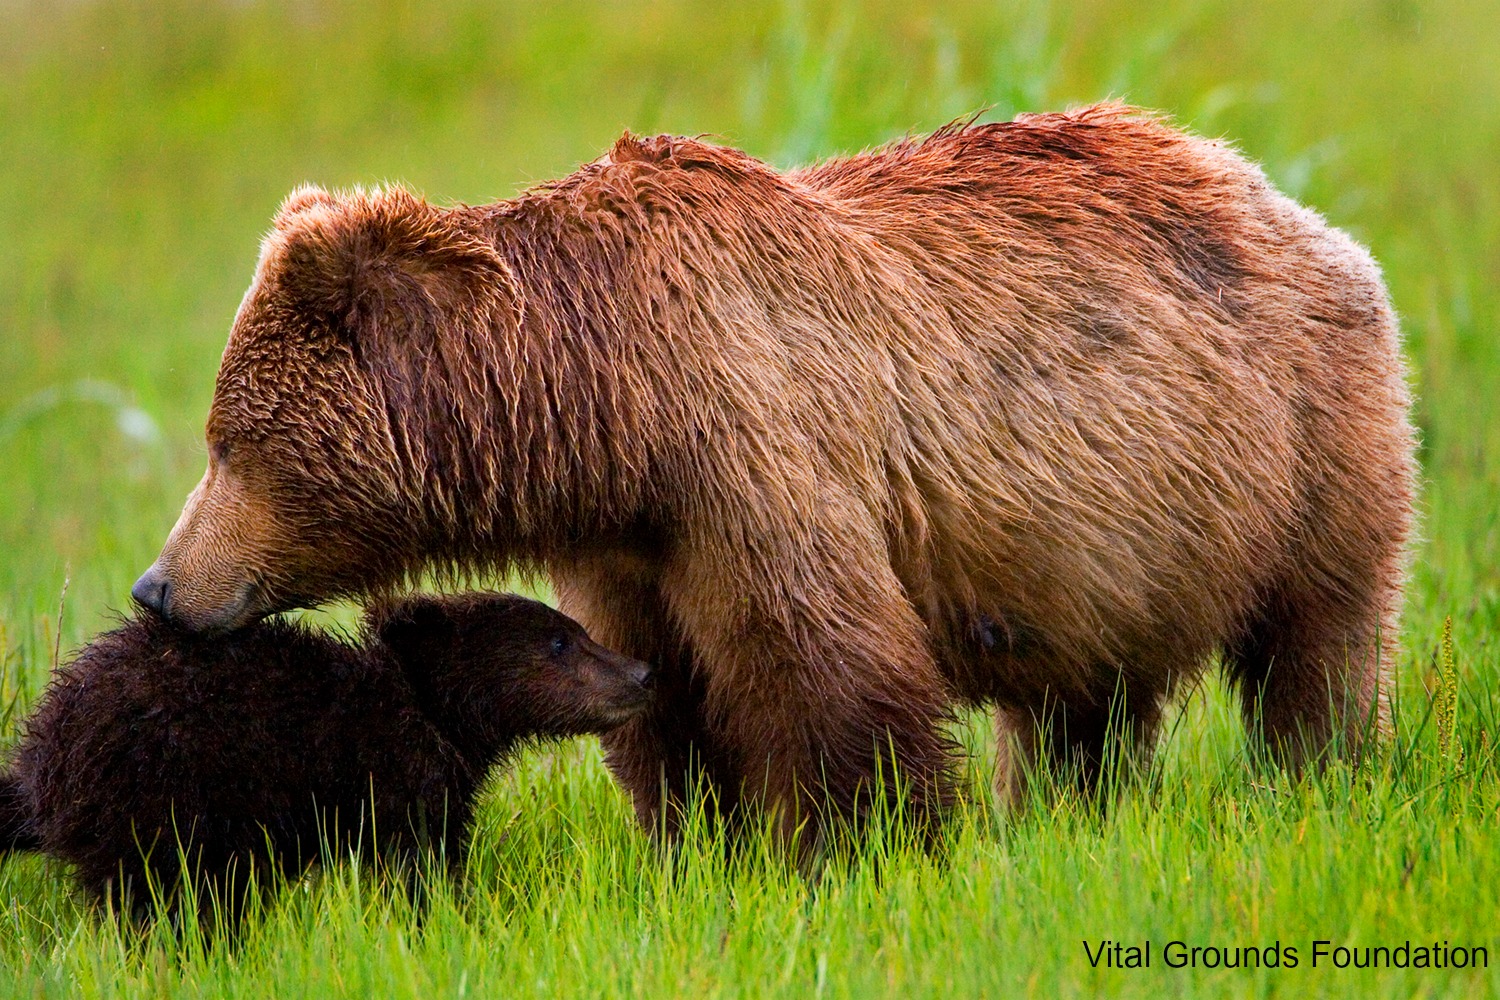 a brown bear and a bear cub in a field of green grass. Text overlay says "Vital Grounds Foundation." 